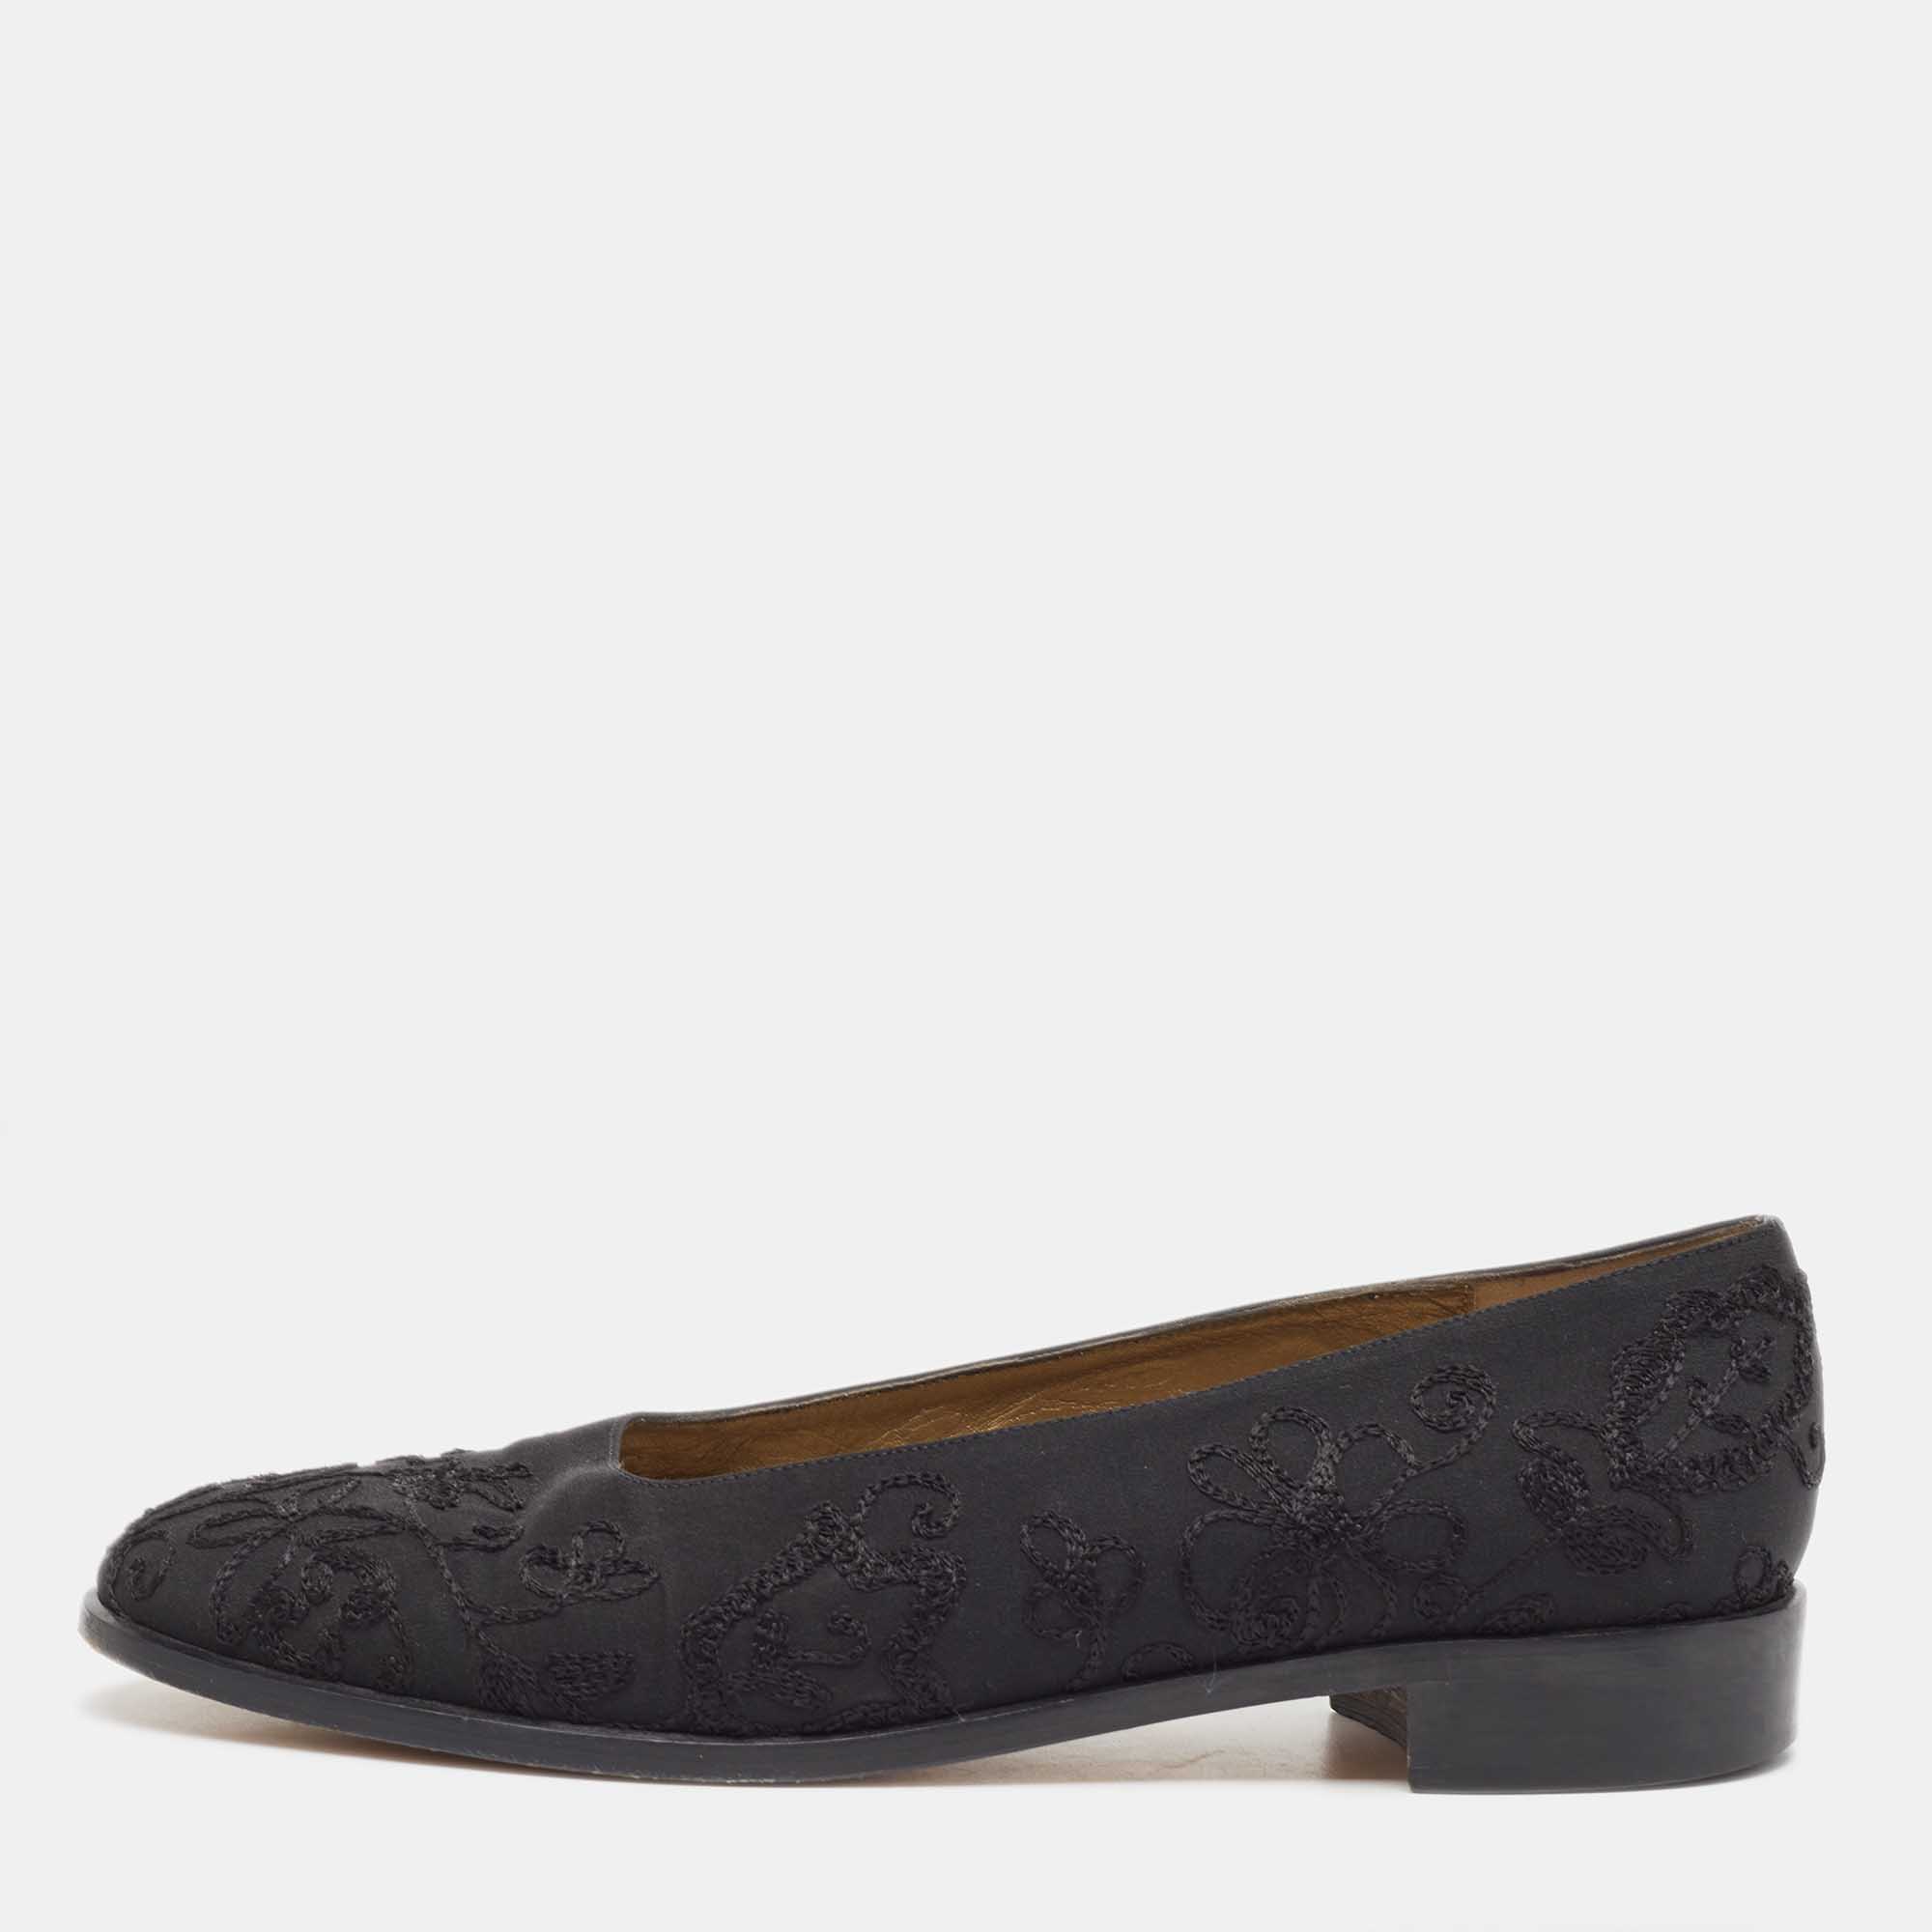 Pre-owned Saint Laurent Black Embroidered Fabric Ballet Flats Size 41.5